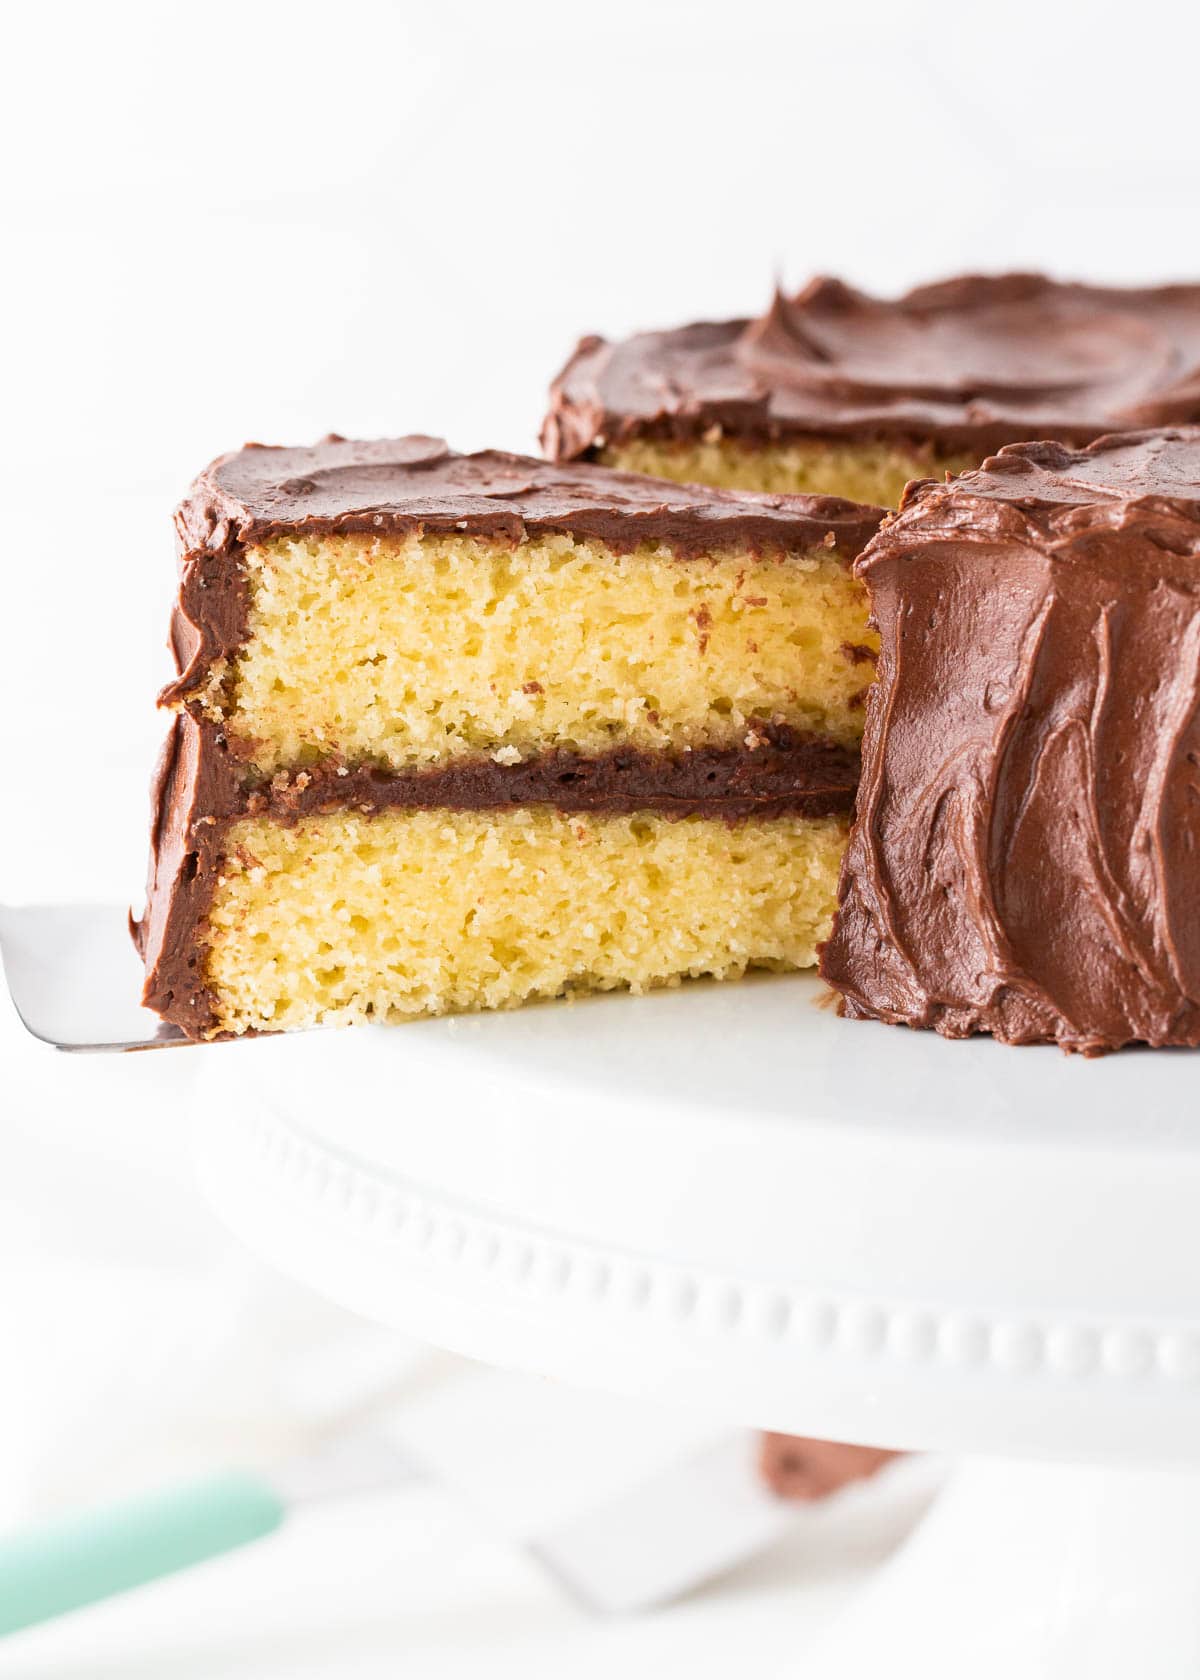 Slice of yellow cake on a cake stand.